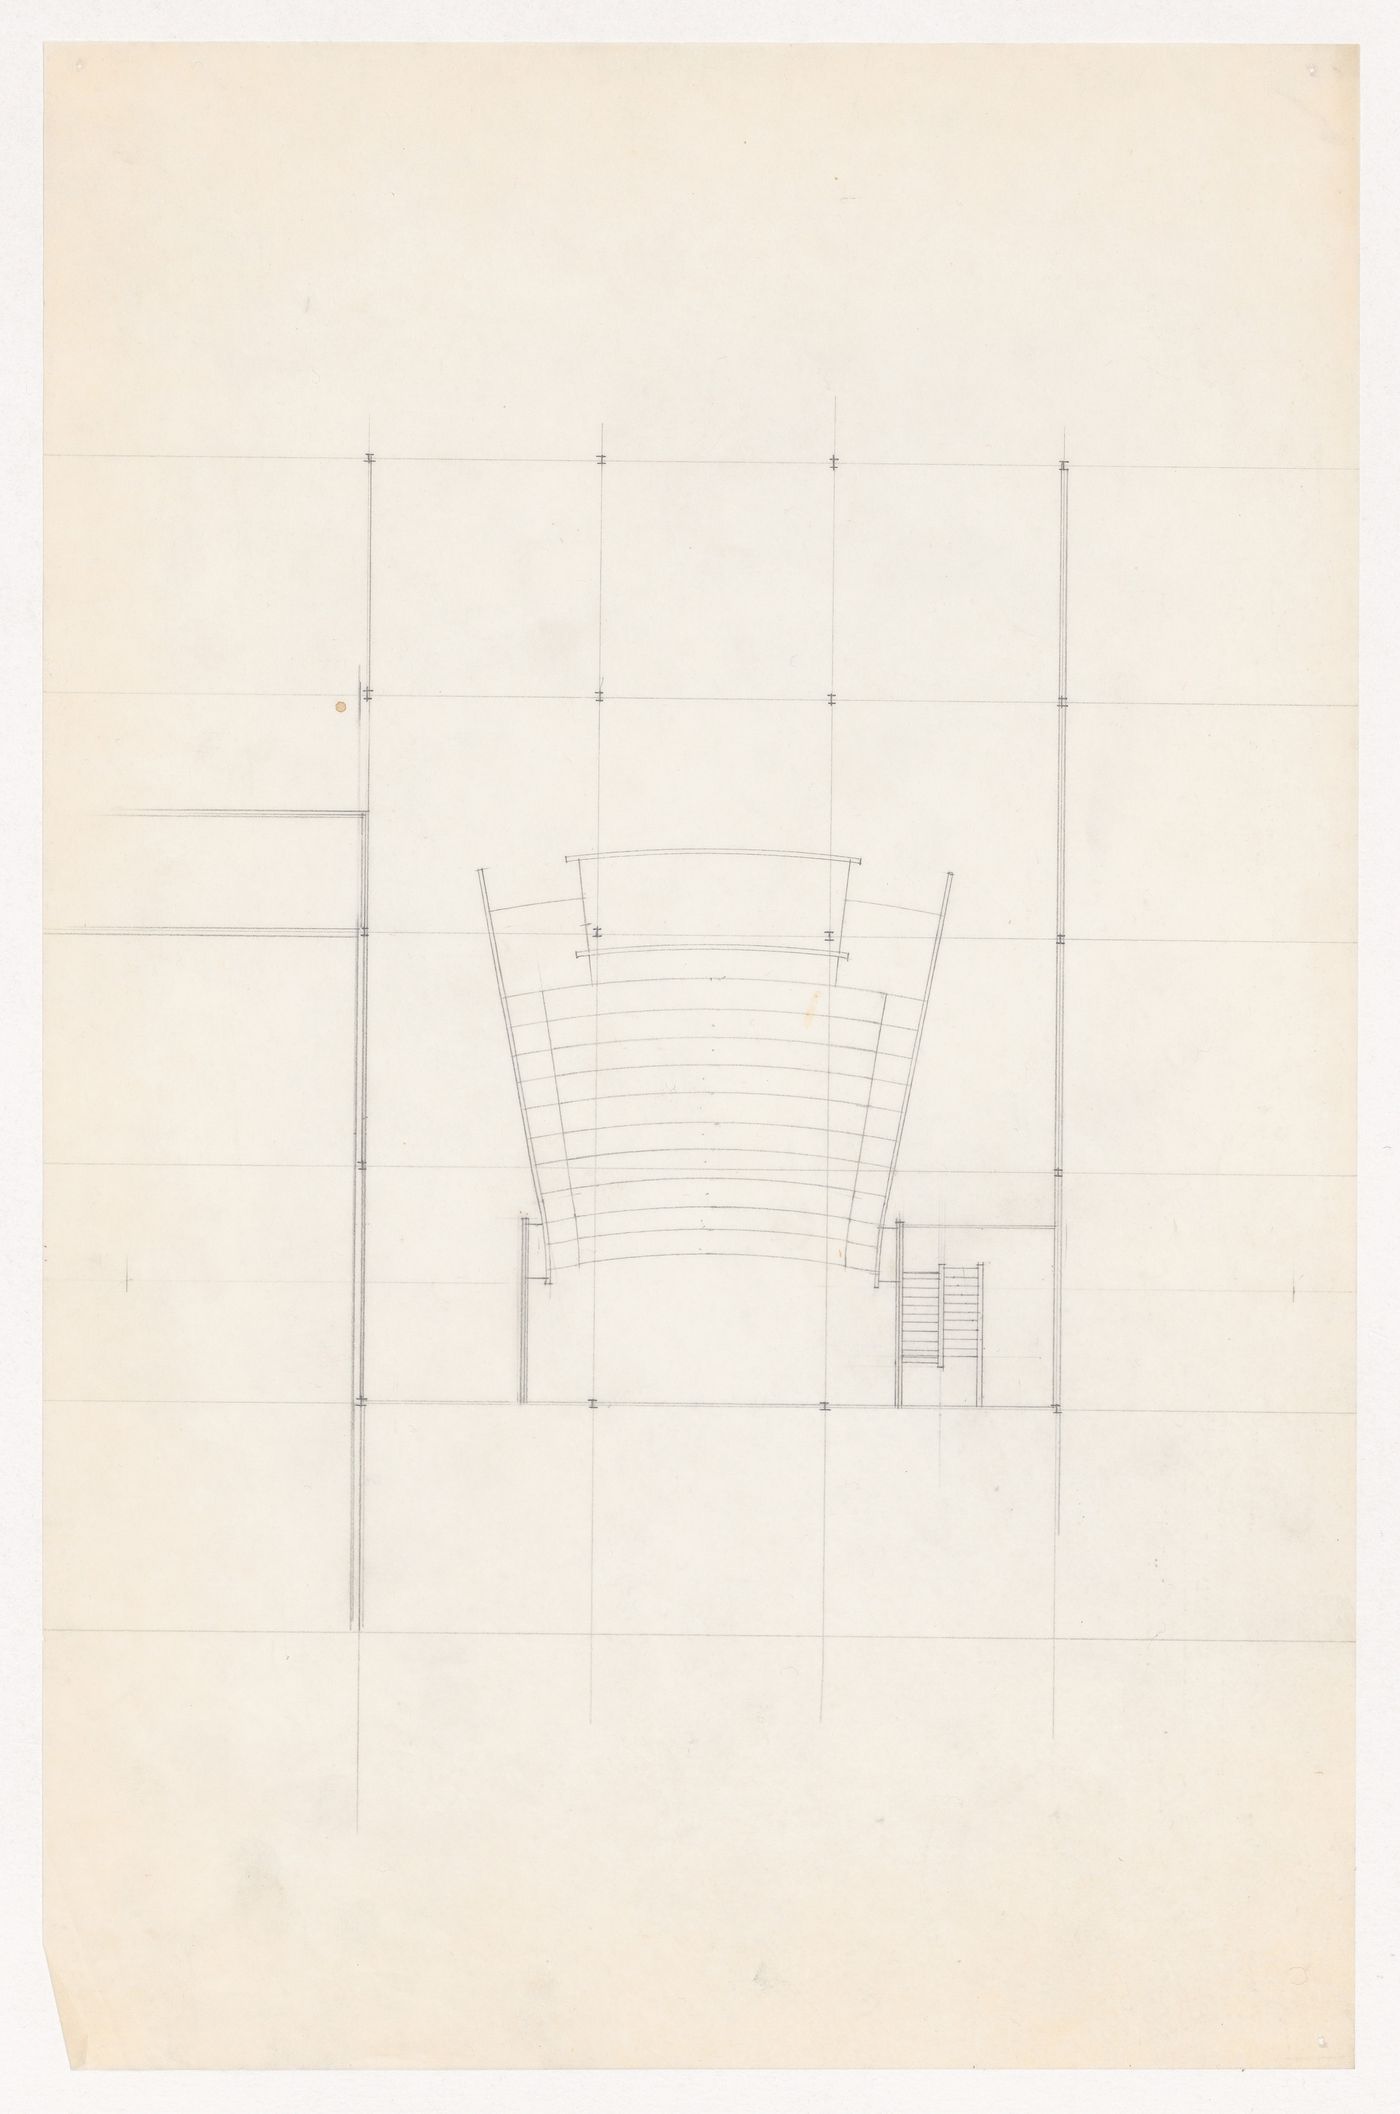 Plan for an auditorium for the Metallurgy Building, Illinois Institute of Technology, Chicago